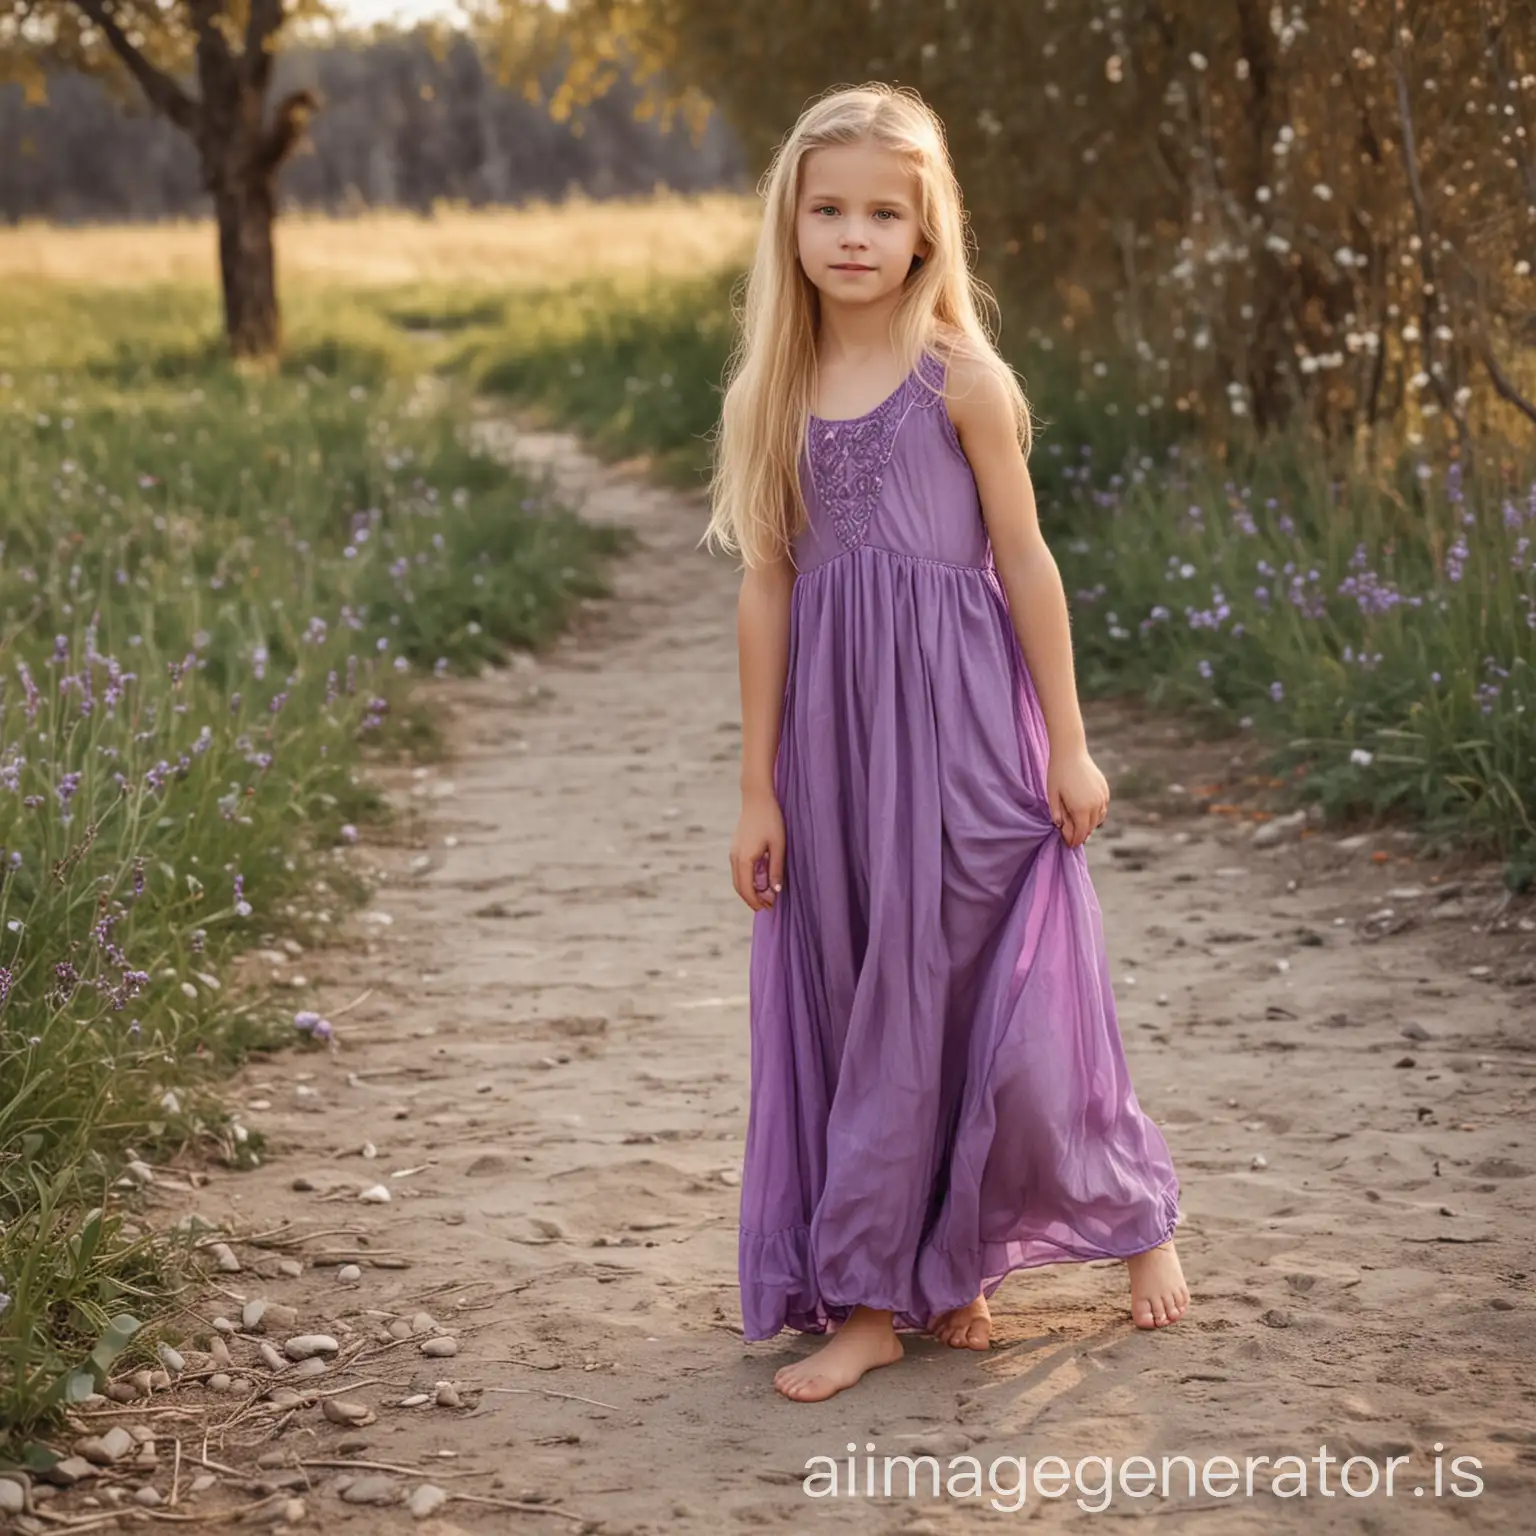 11 Years Young Cute Child Girl With Long Blonde Hair And Dress Purple Gown On And Standing Barefoot Barefeet